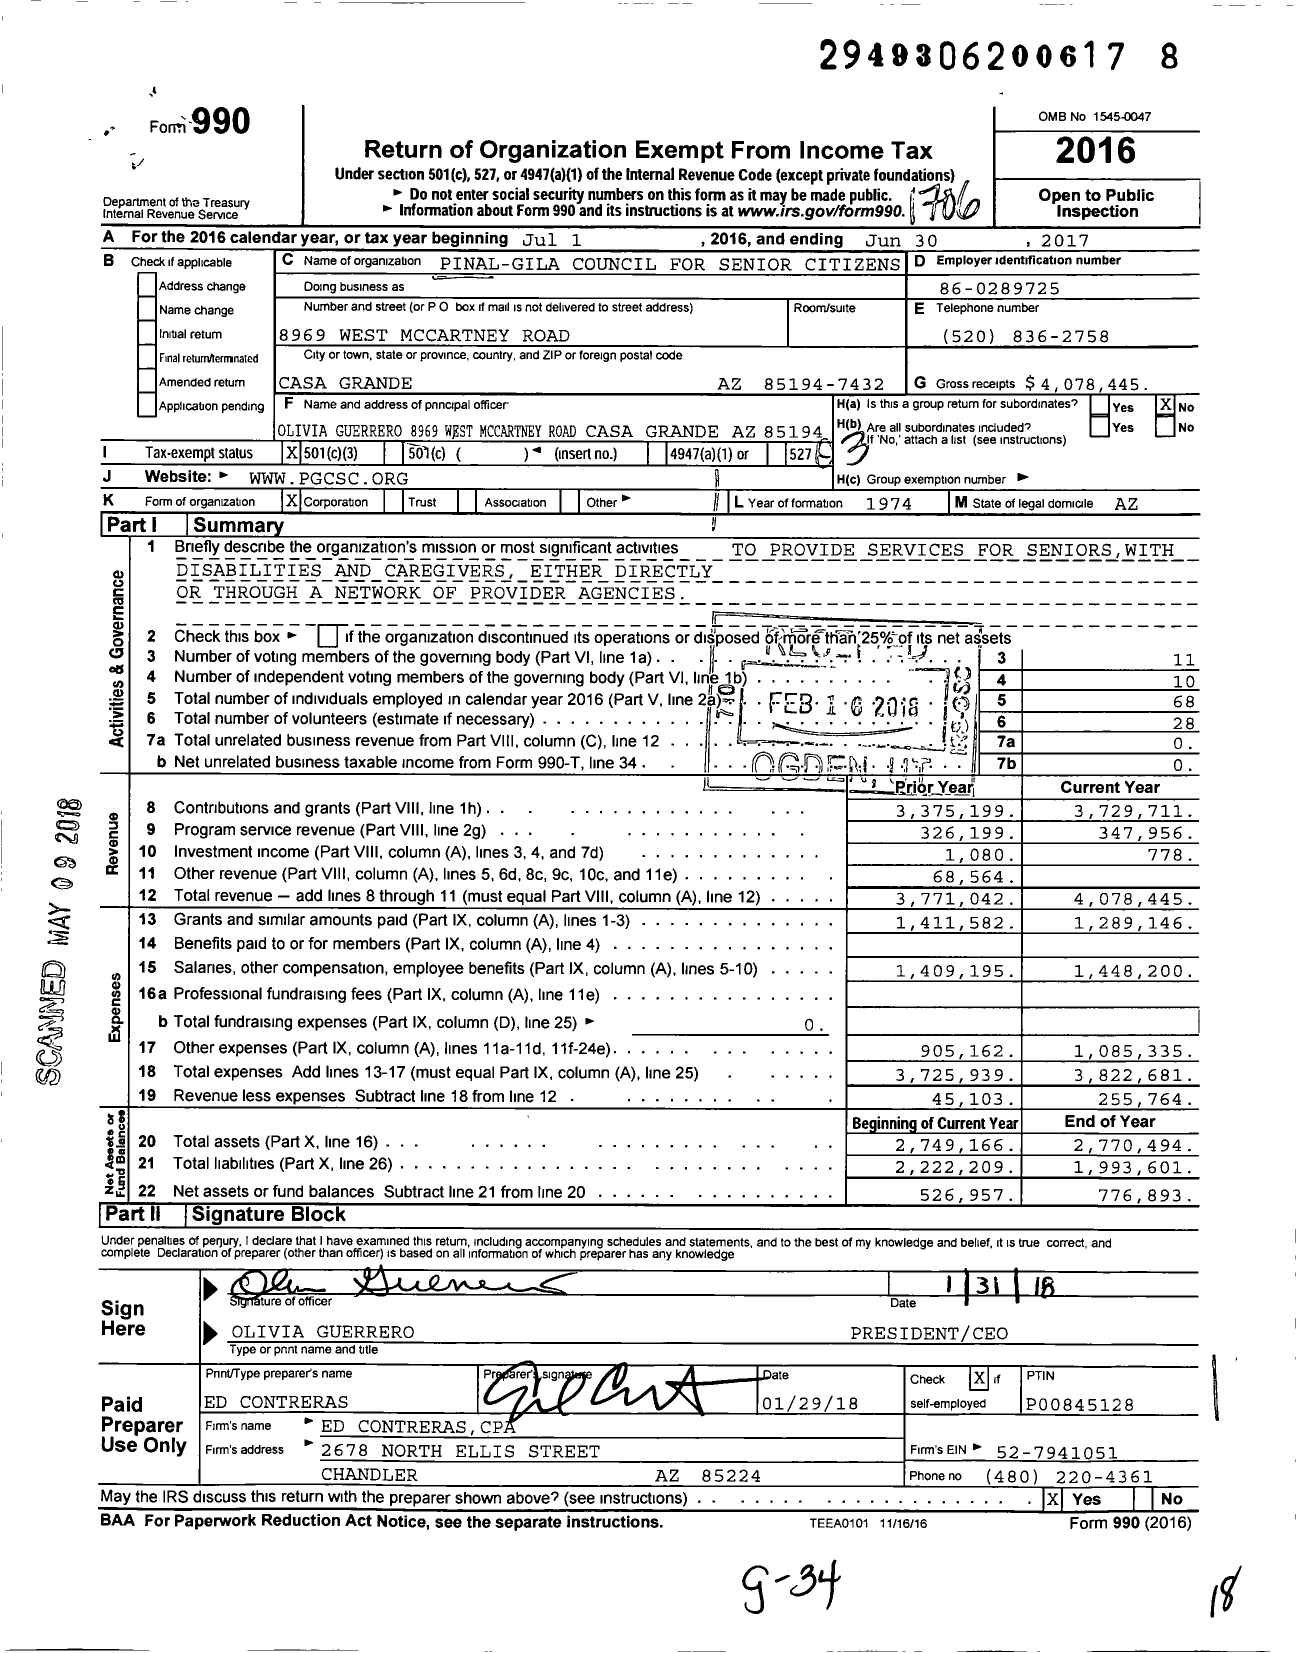 Image of first page of 2016 Form 990 for Pinal-Gila Council for Senior Citizens